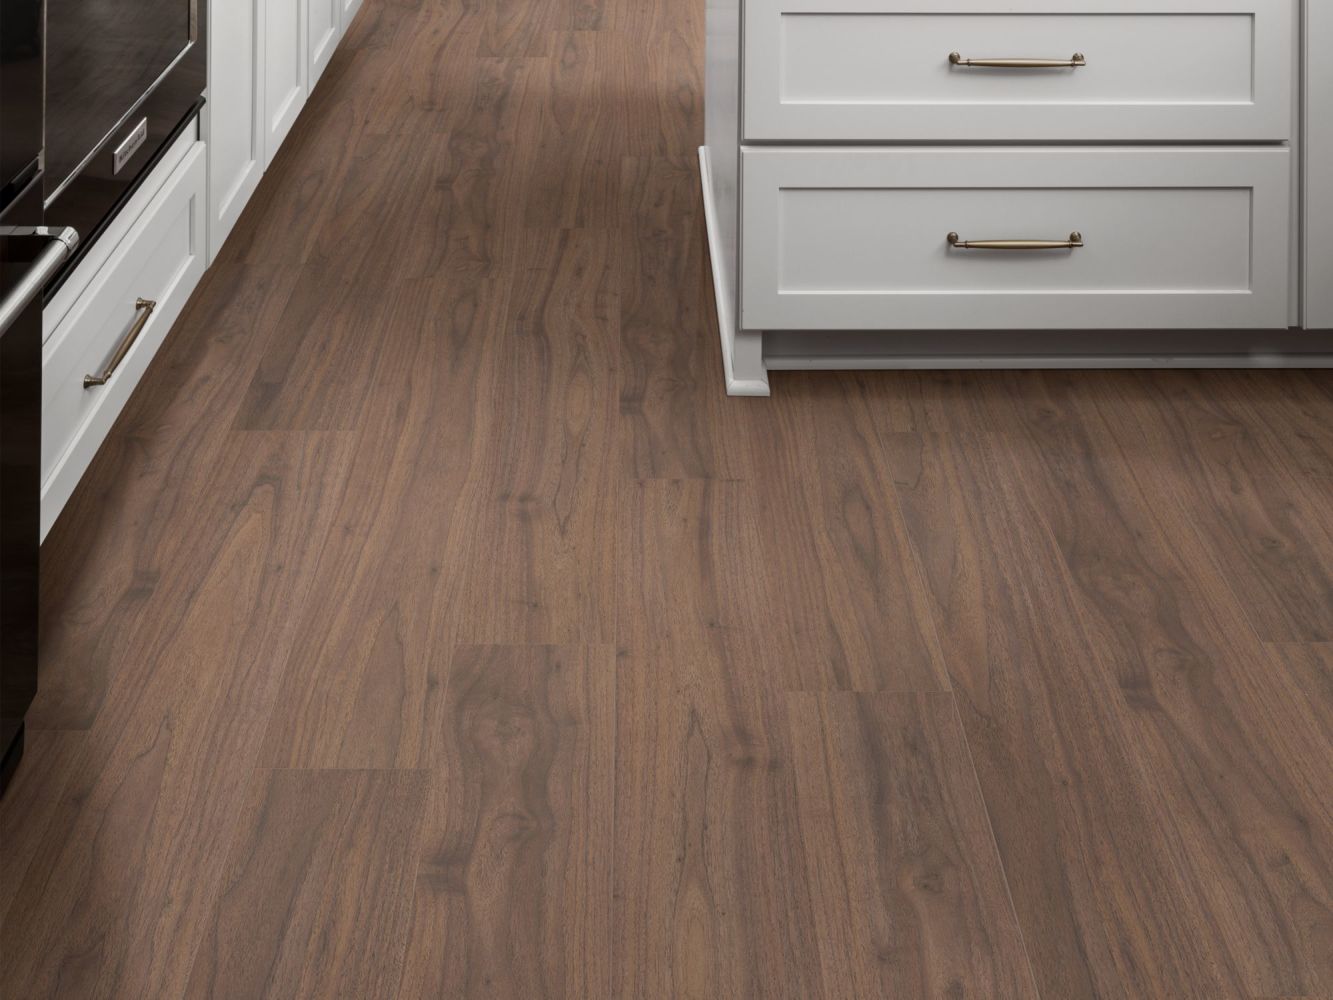 Shaw Floors Resilient Property Solutions Prominence Plus Smoked Walnut 07229_VE381